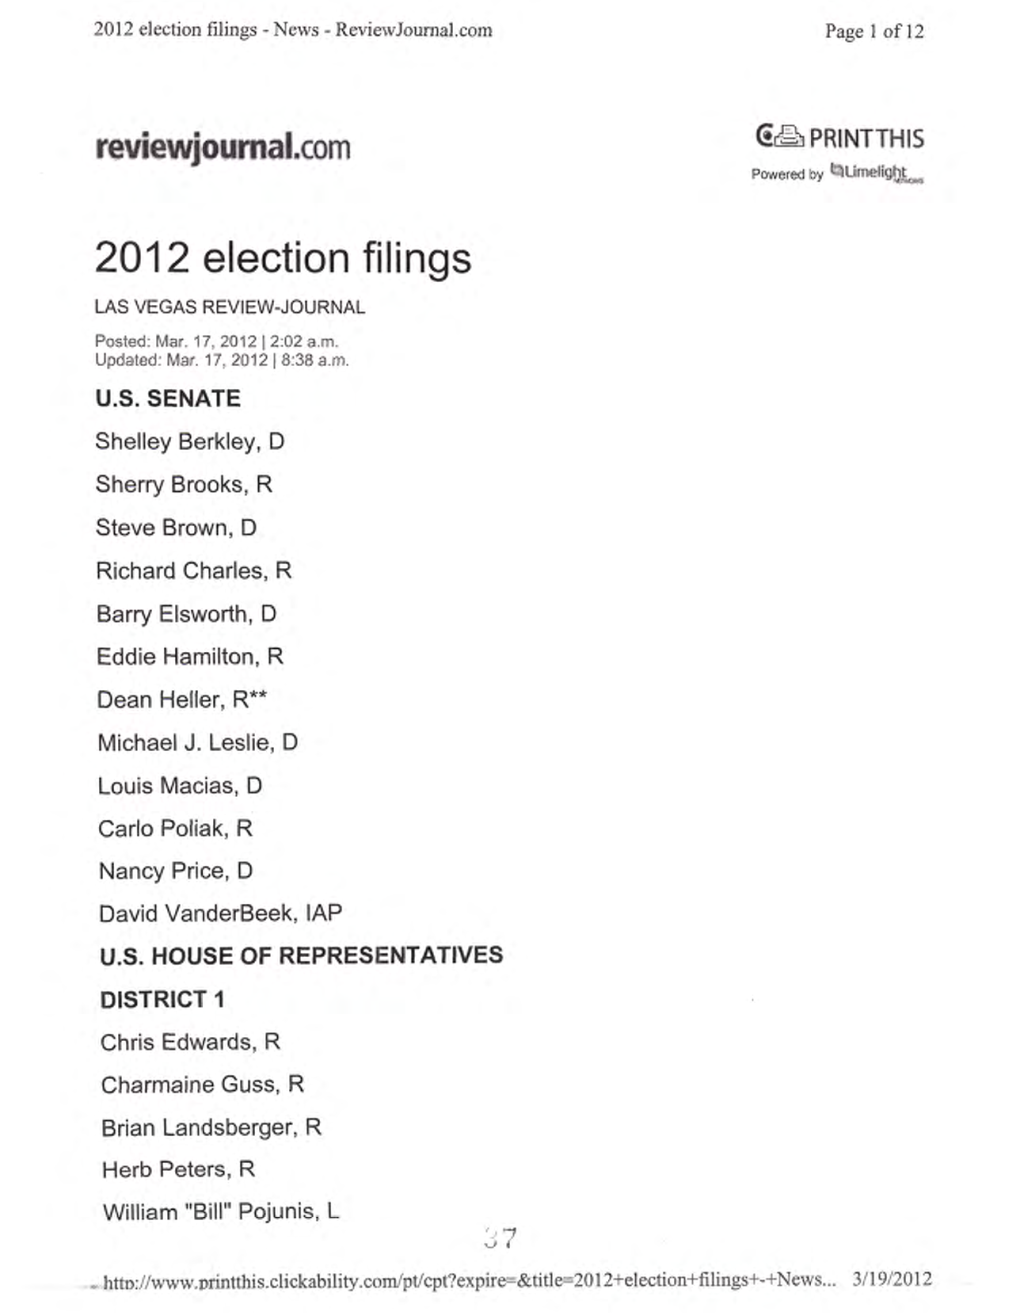 2012 Election Filings - News - Reviewjournal.Com Page 1 of 12